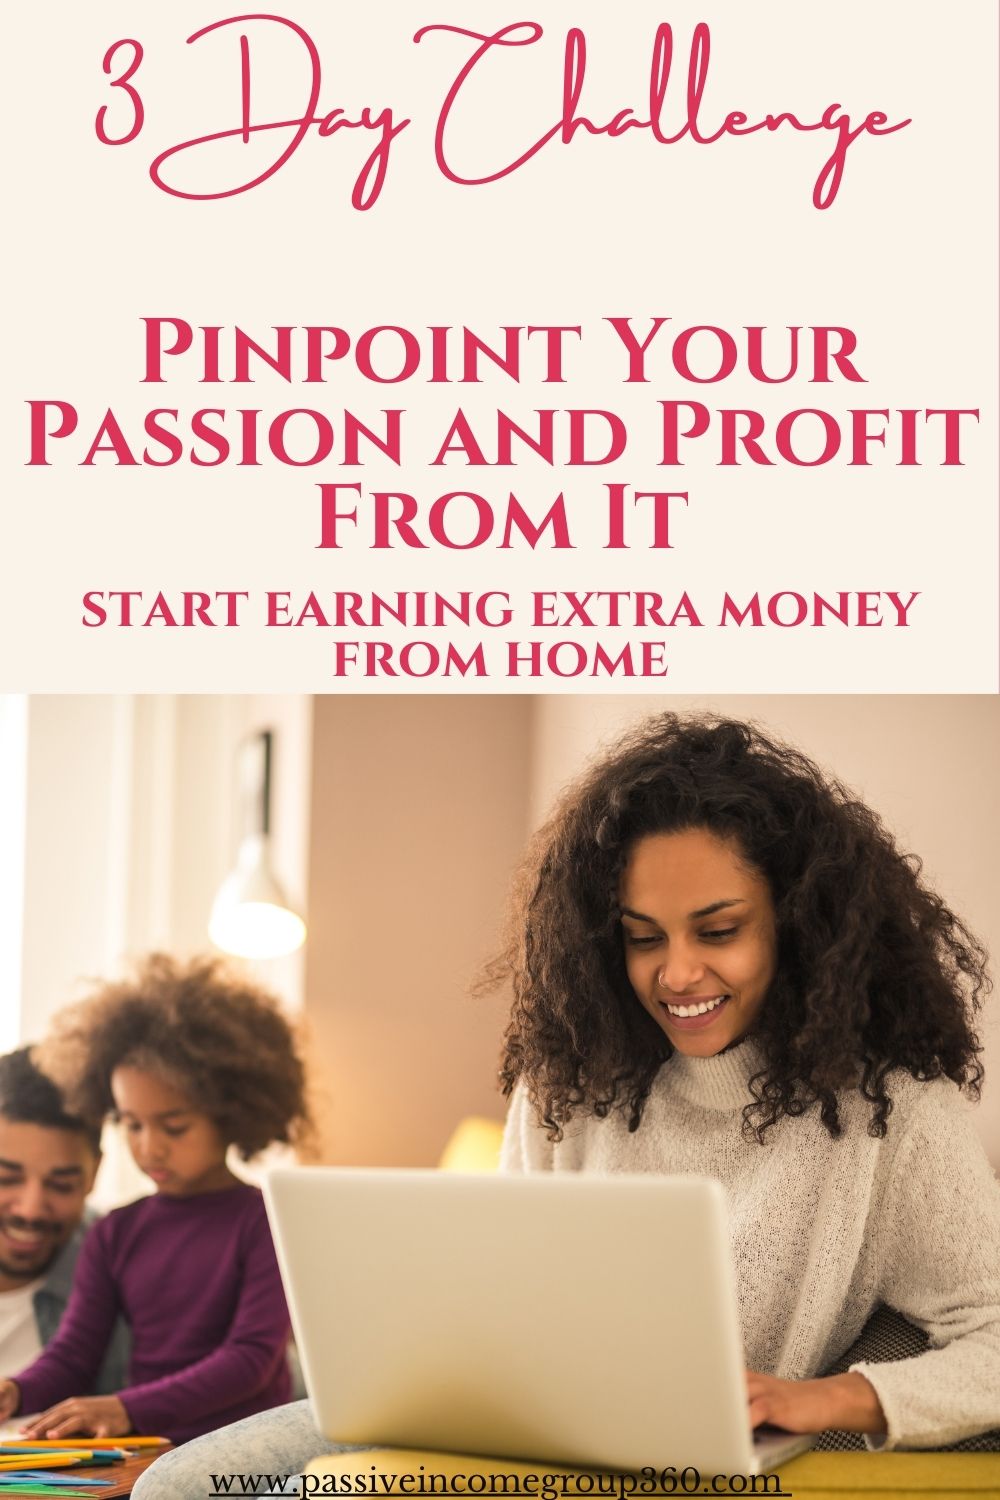 pinpoint your passion workshop